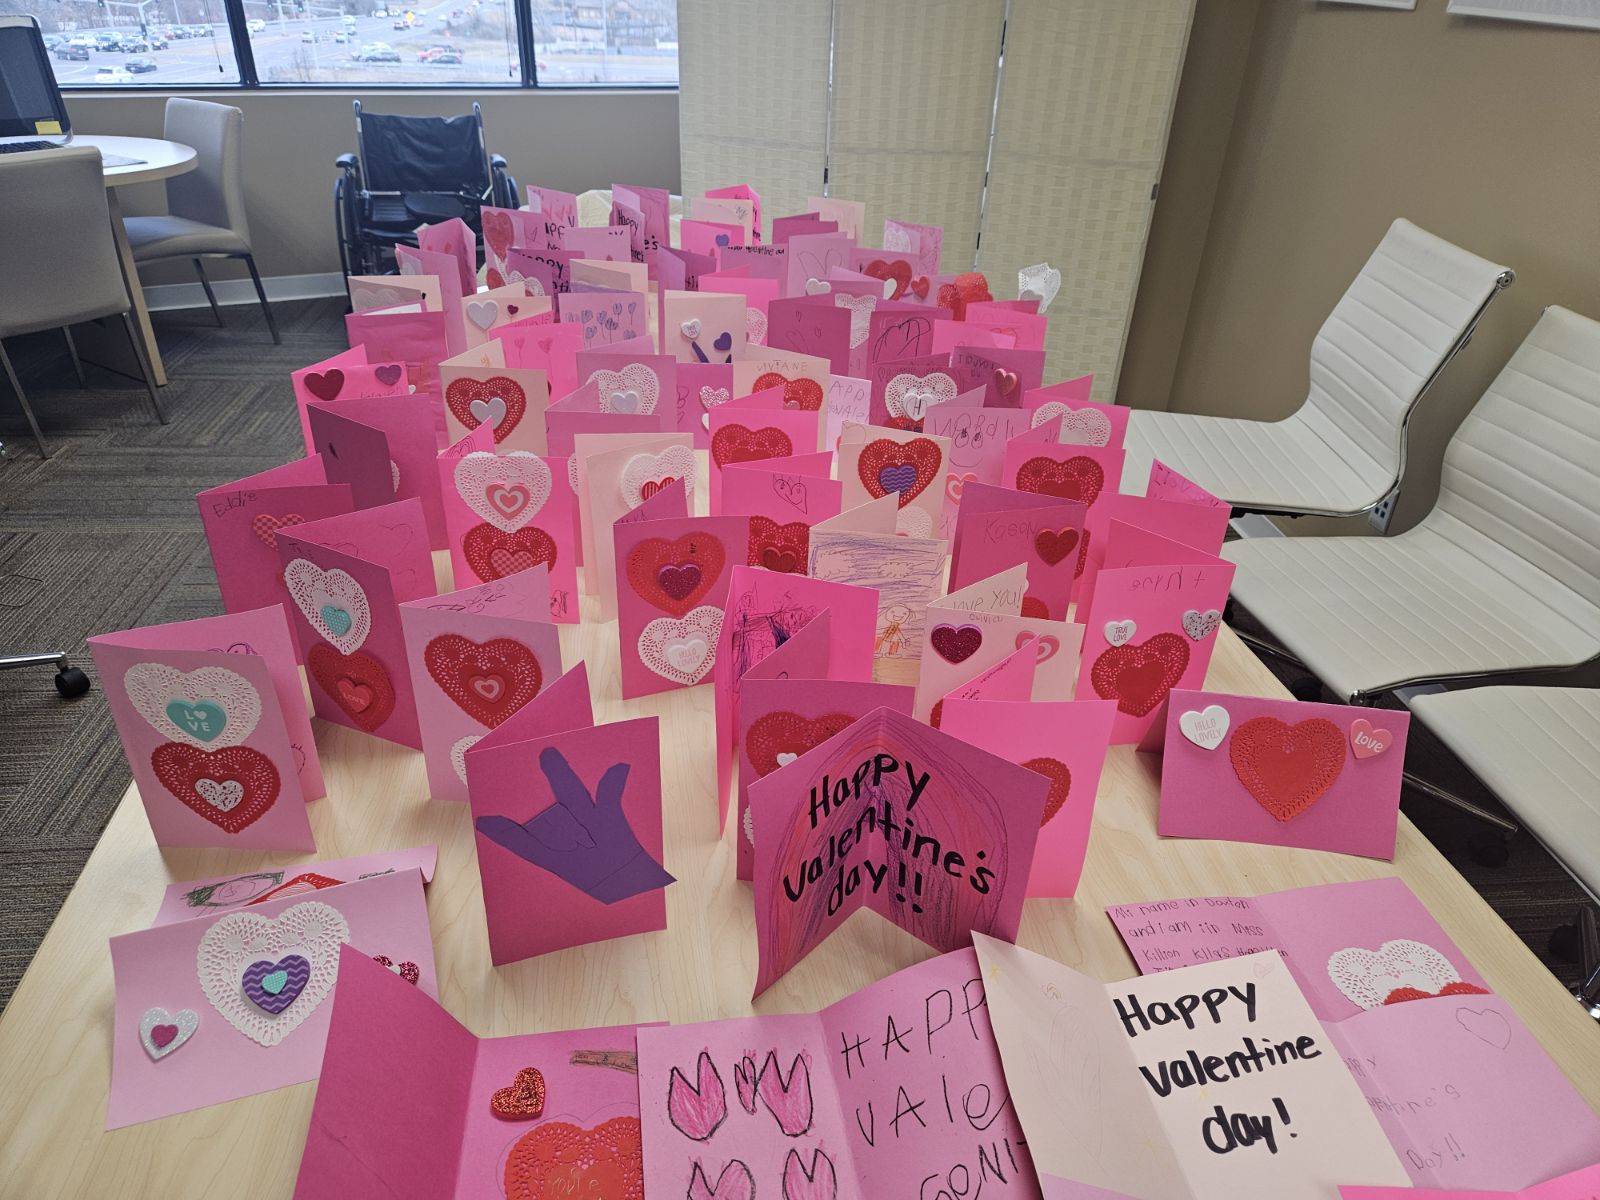 These valentines will make so many seniors in St. Louis smile!